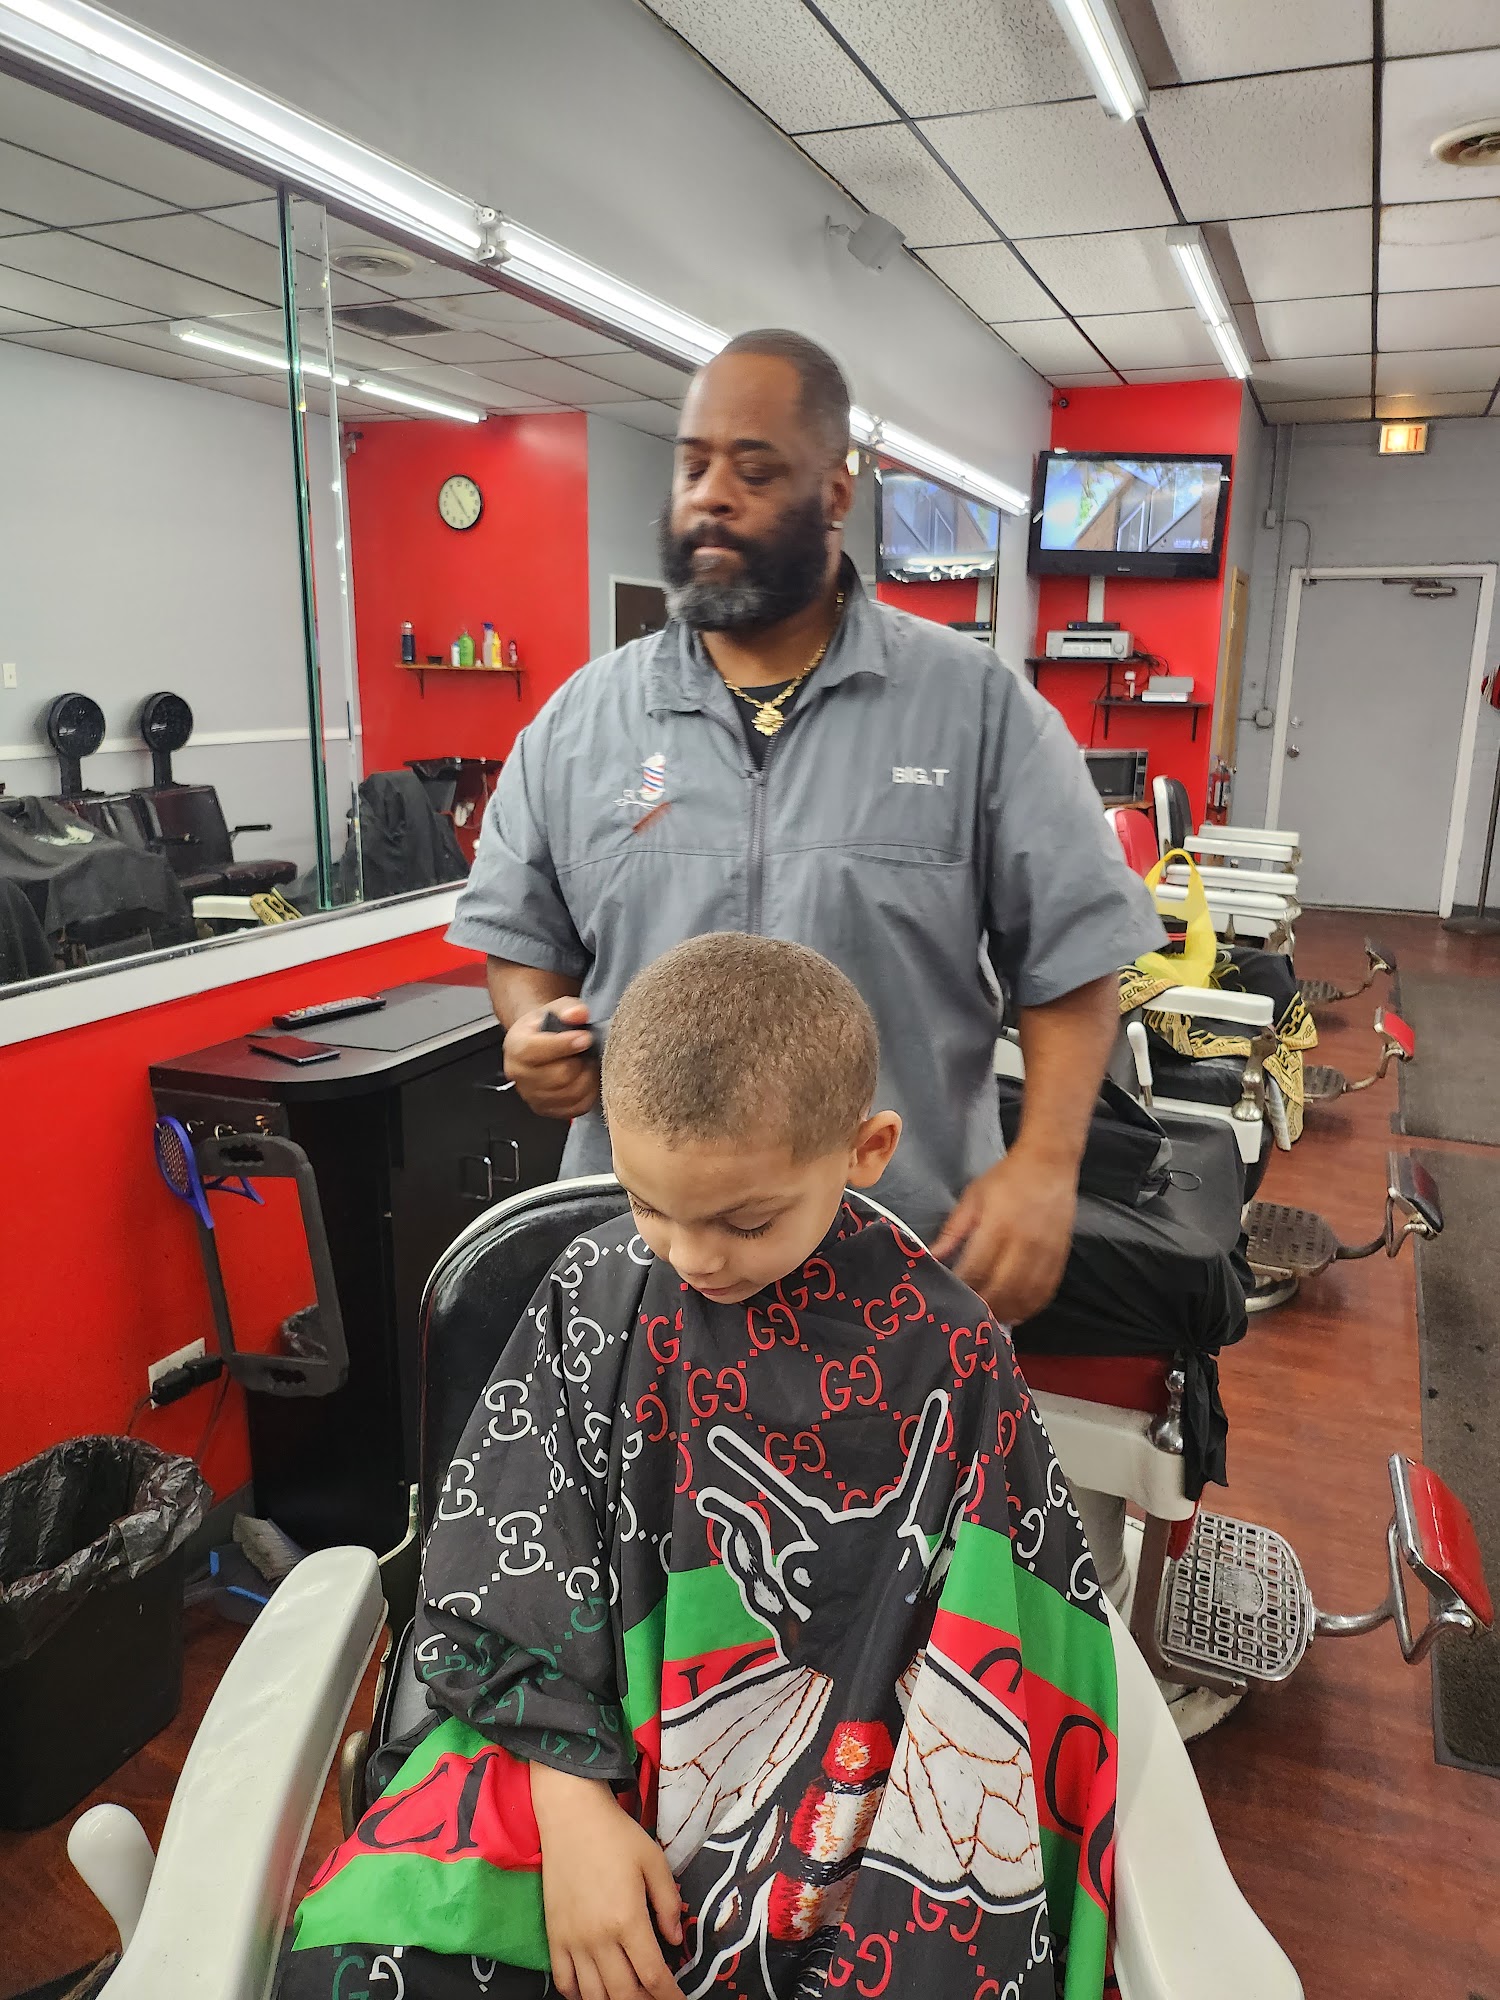 Studio cuts Barber shop 4023 west 175th St, Country Club Hills Illinois 60478